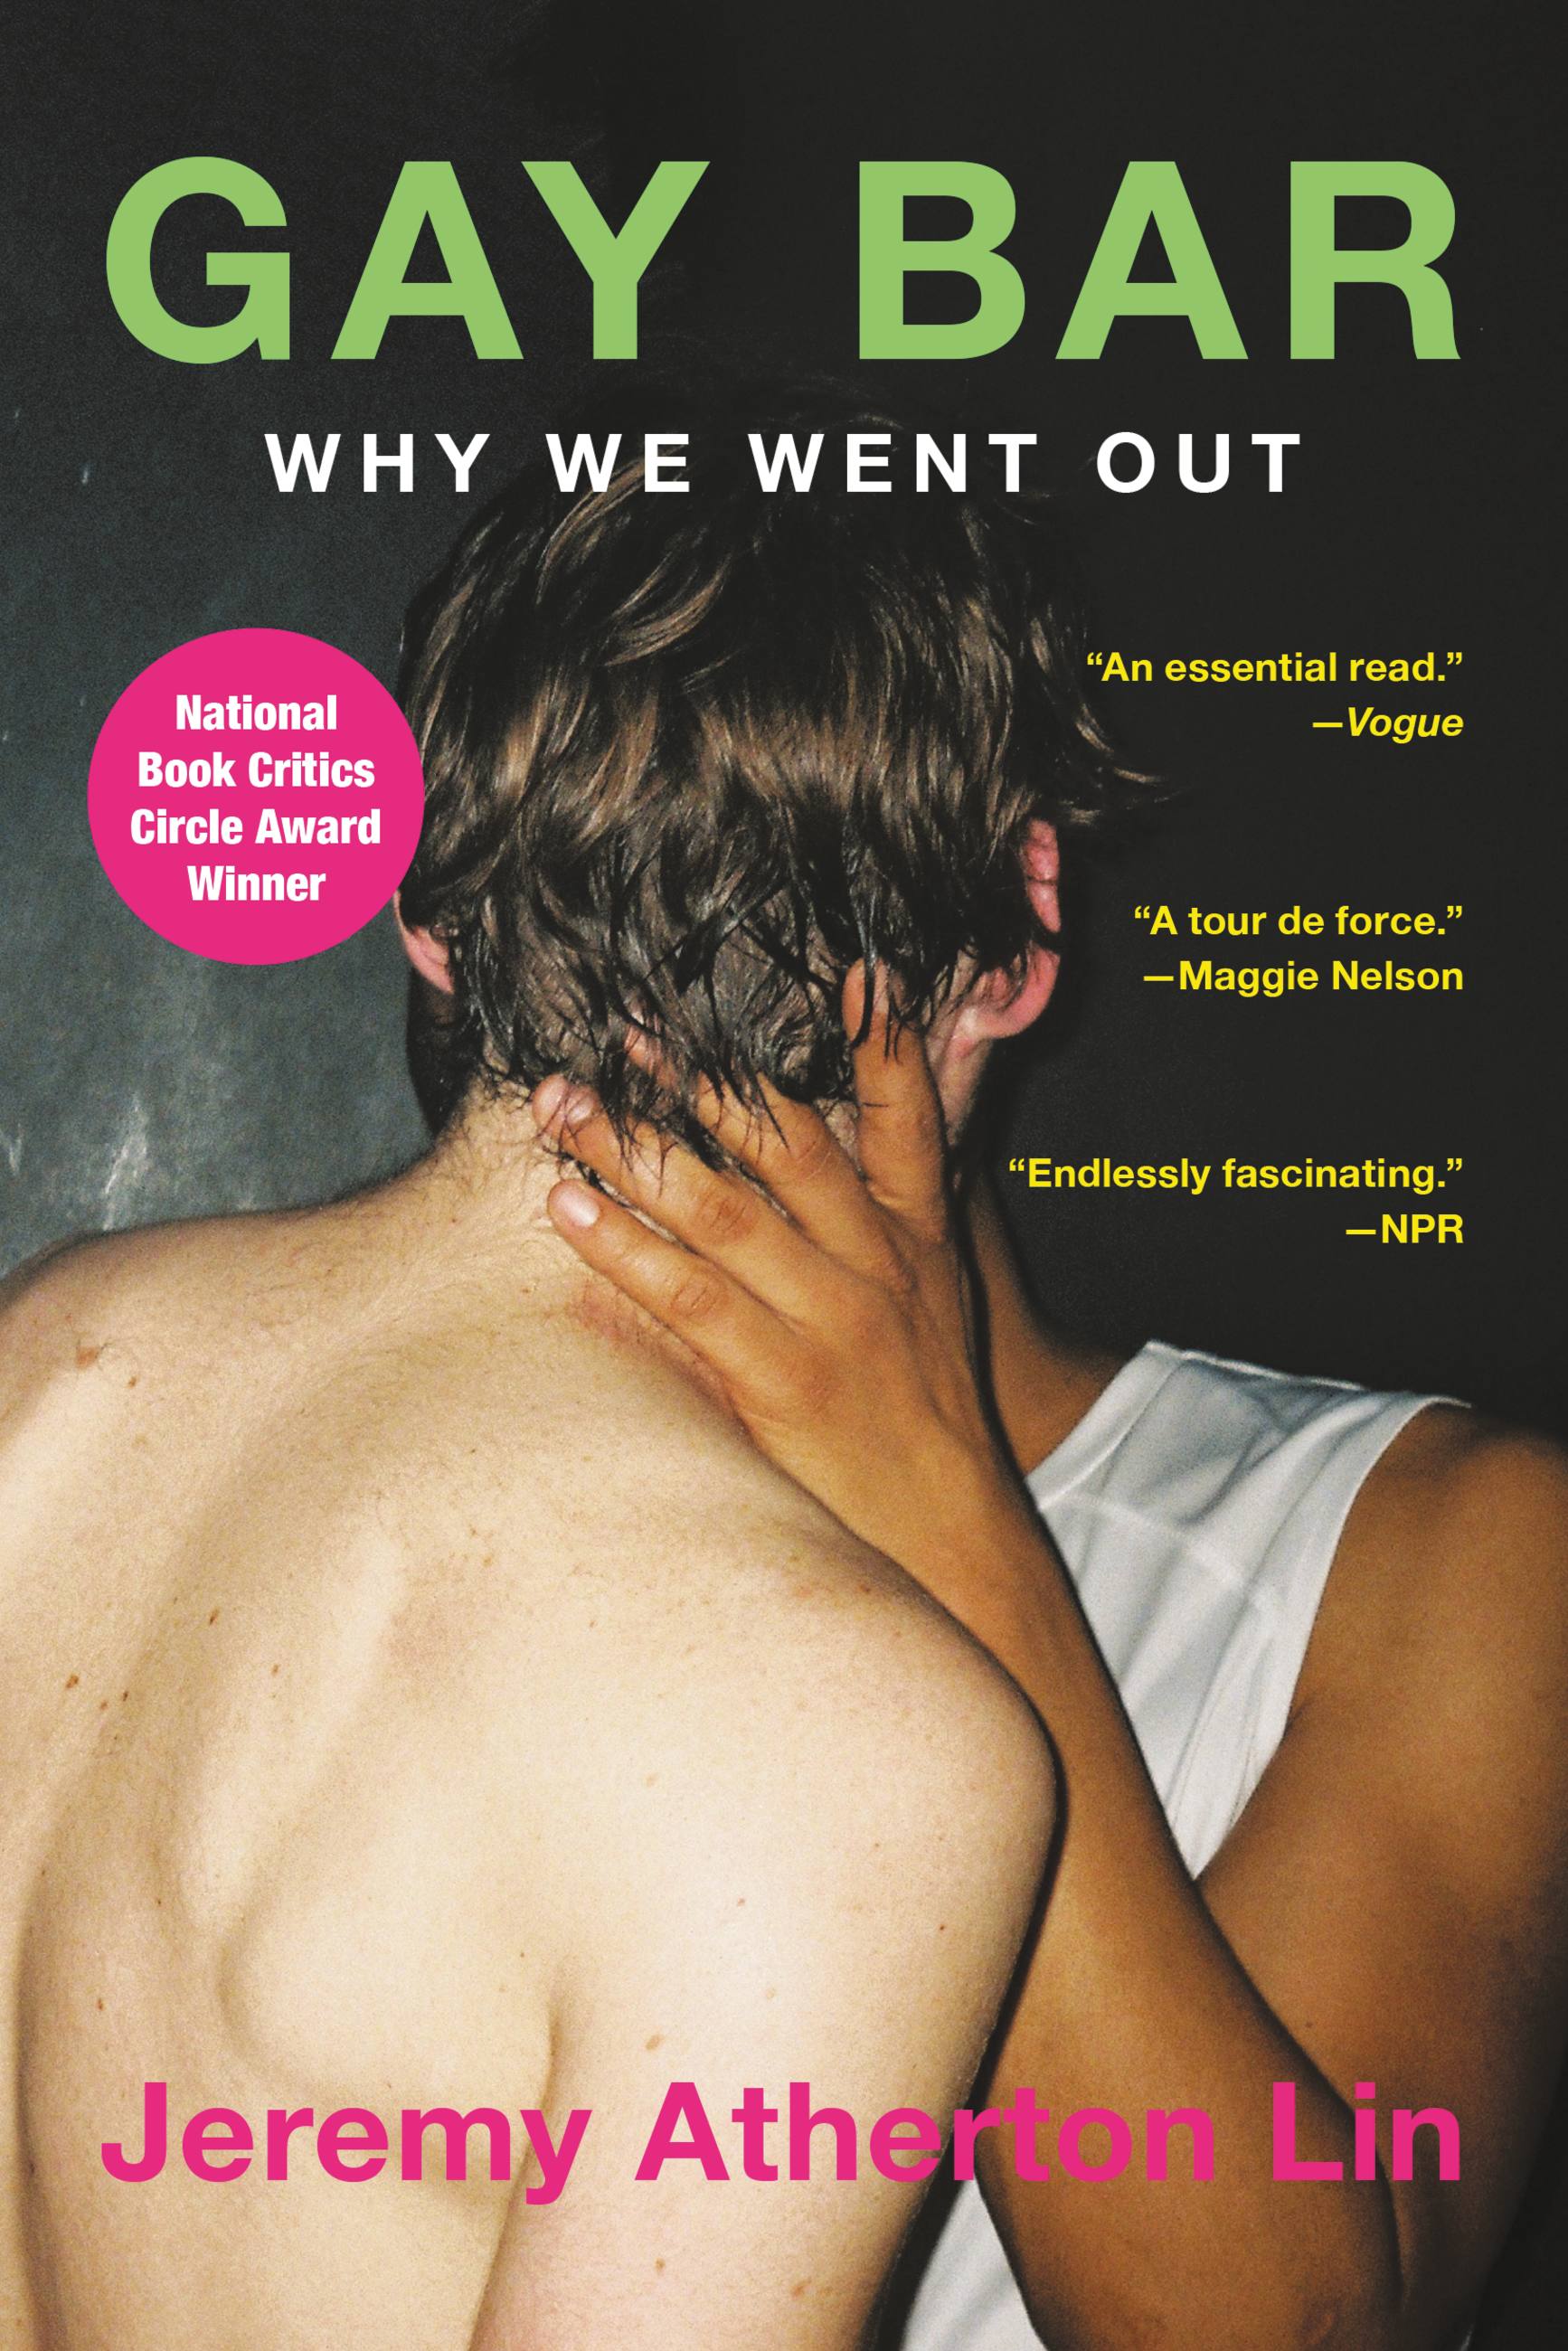 Airhostes Forced Fucked Video Download - Gay Bar by Jeremy Atherton Lin | Hachette Book Group